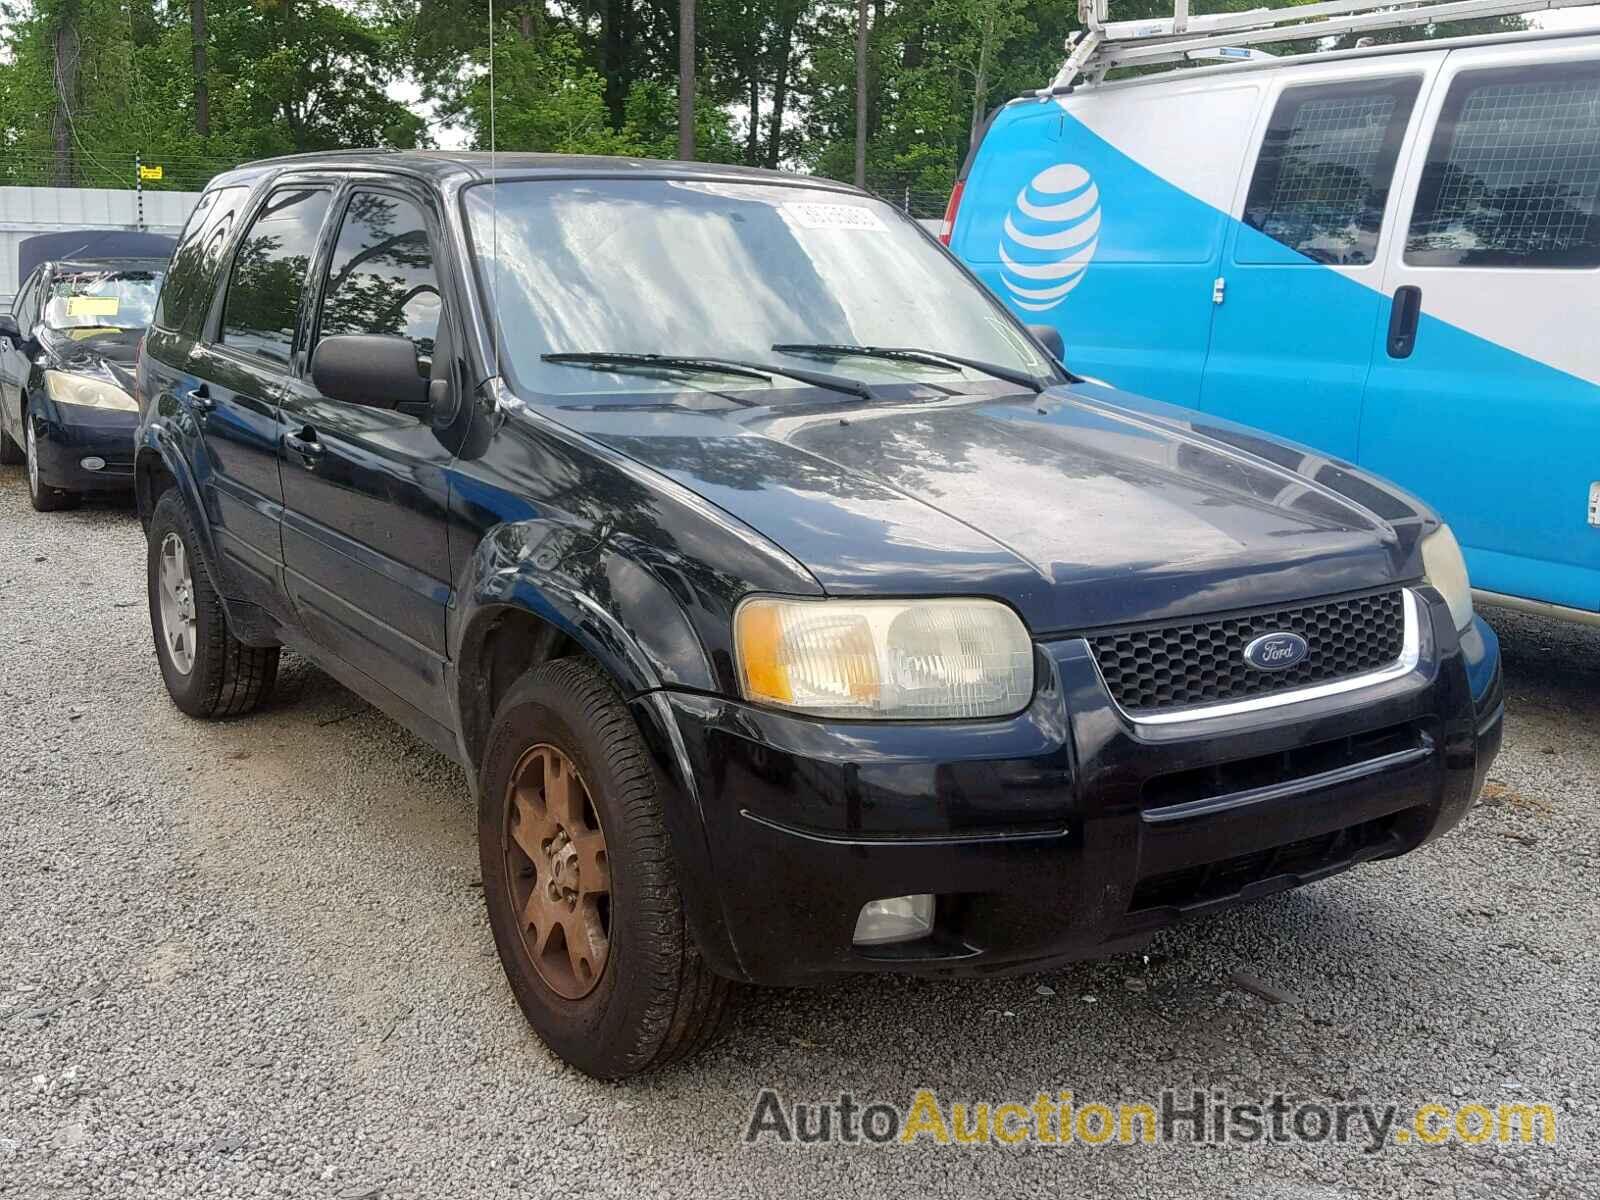 2003 FORD ESCAPE LIMITED, 1FMCU94183KD91816